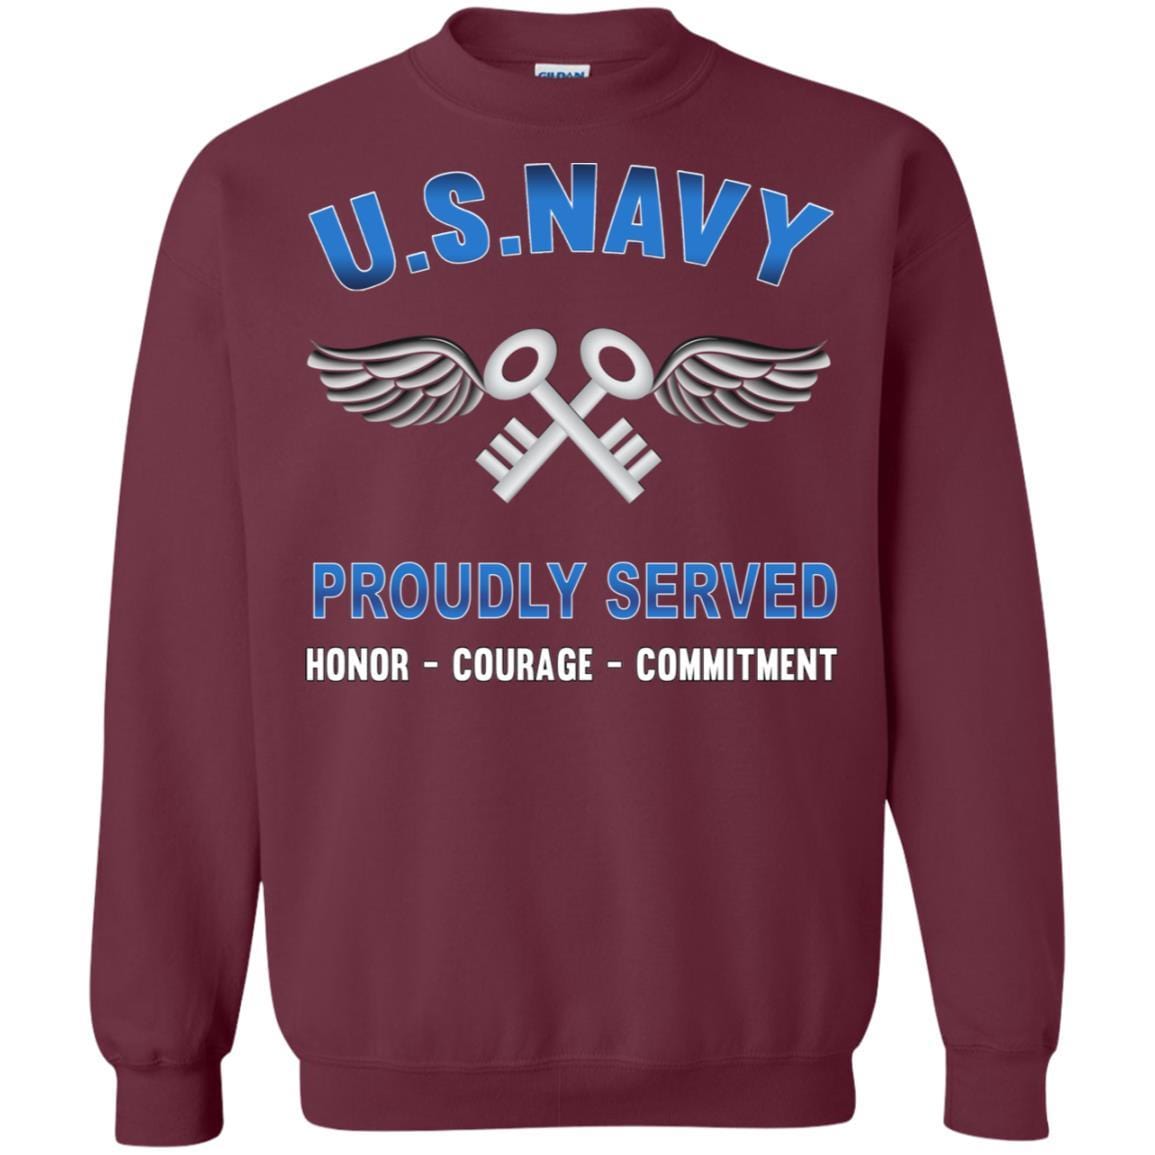 Navy Aviation Storekeeper Navy AK - Proudly Served T-Shirt For Men On Front-TShirt-Navy-Veterans Nation